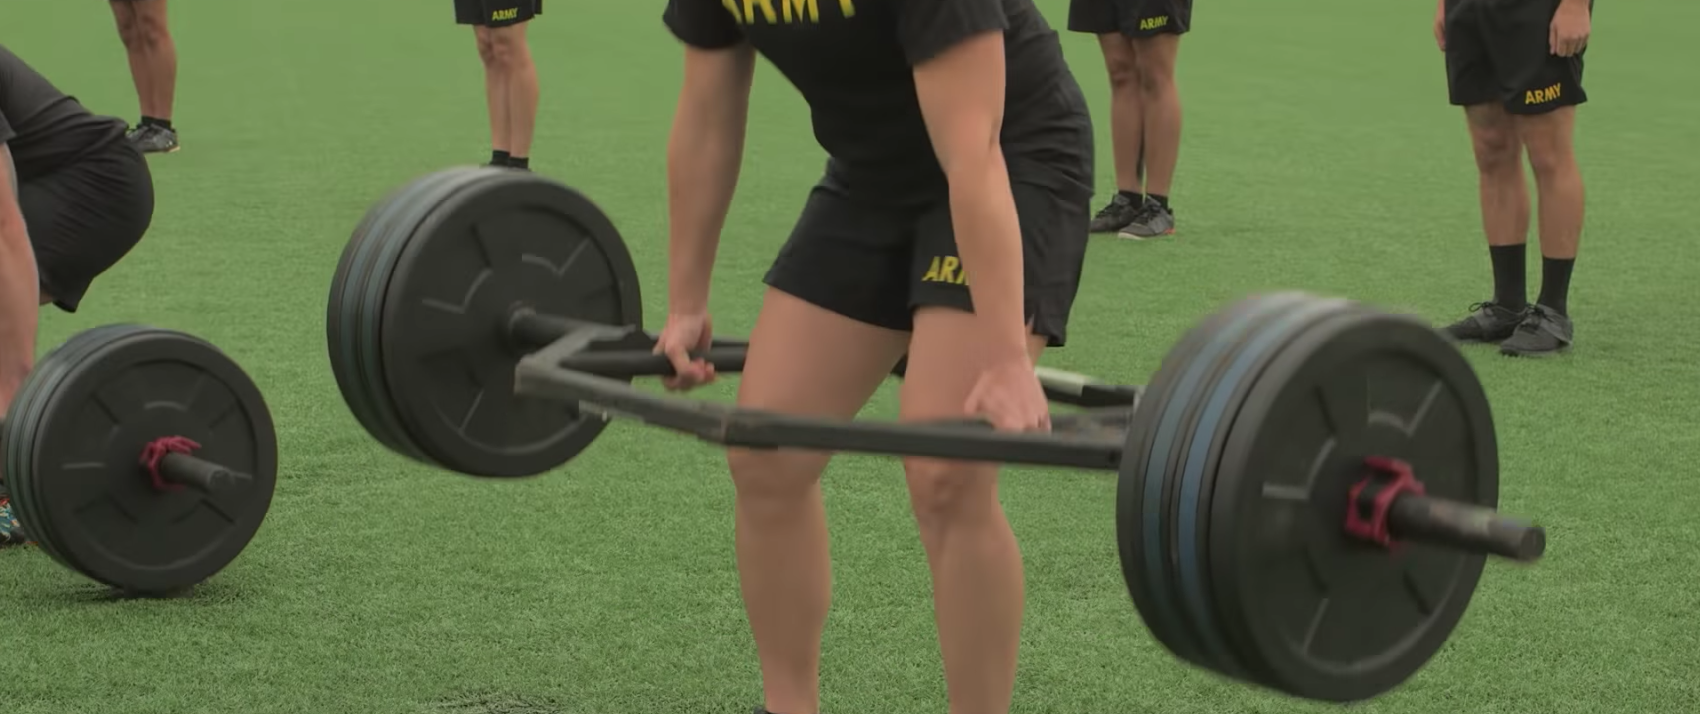 How To Train For The Army Combat Fitness Test Hprc